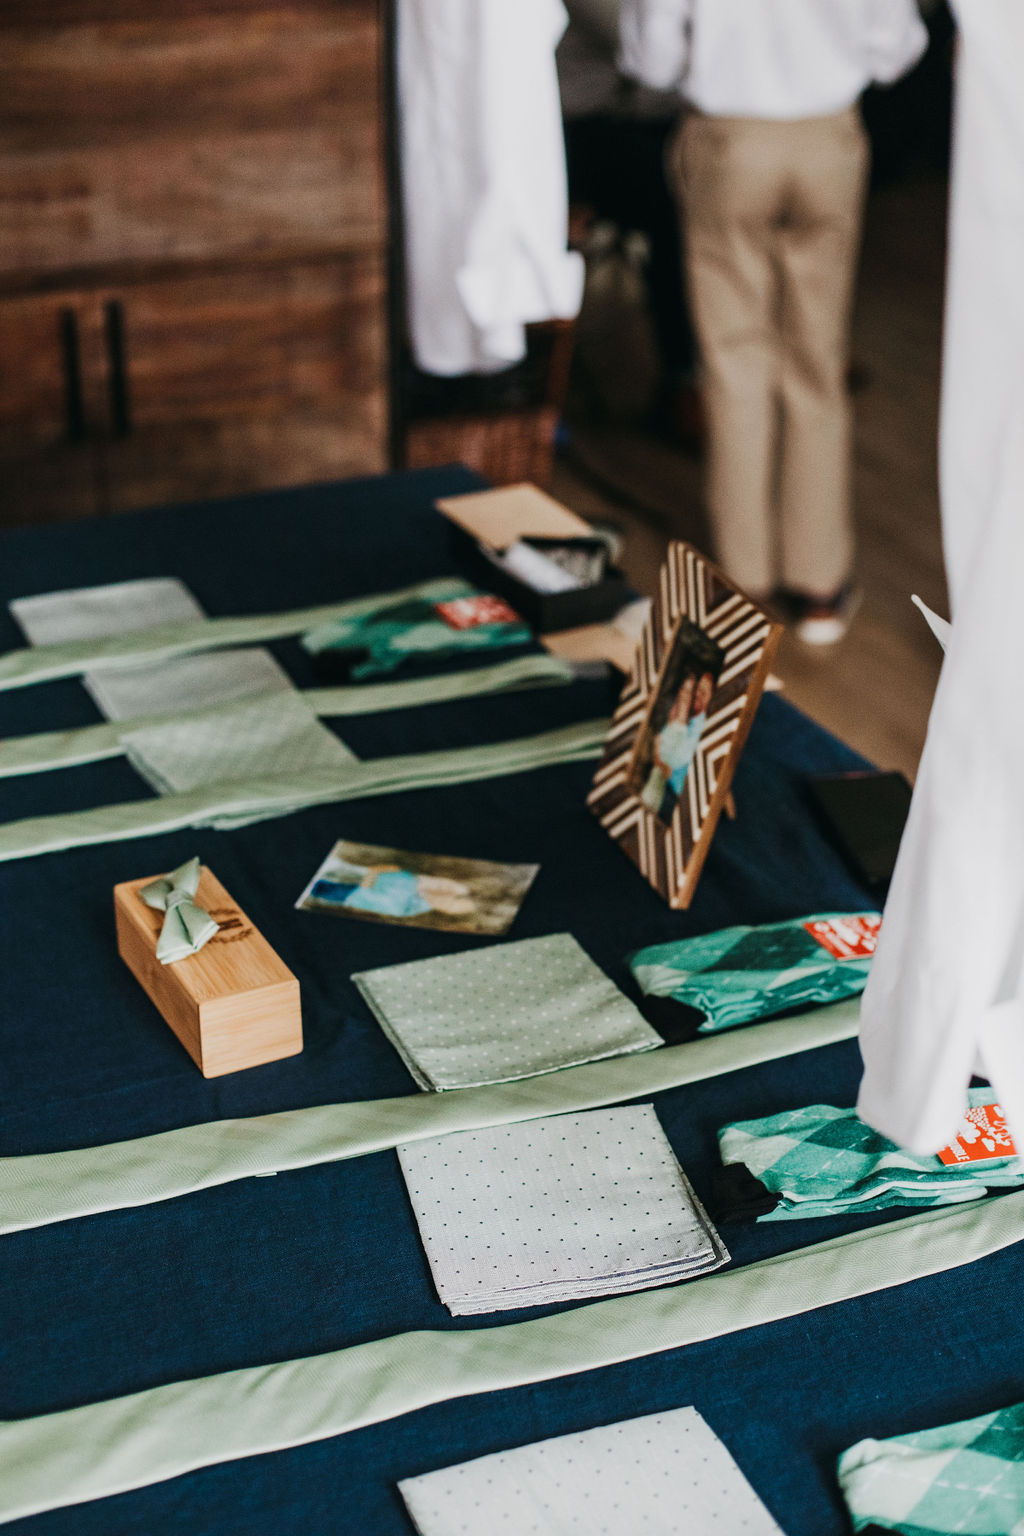 matching green groomsmen ties, pocket squares and socks on a table